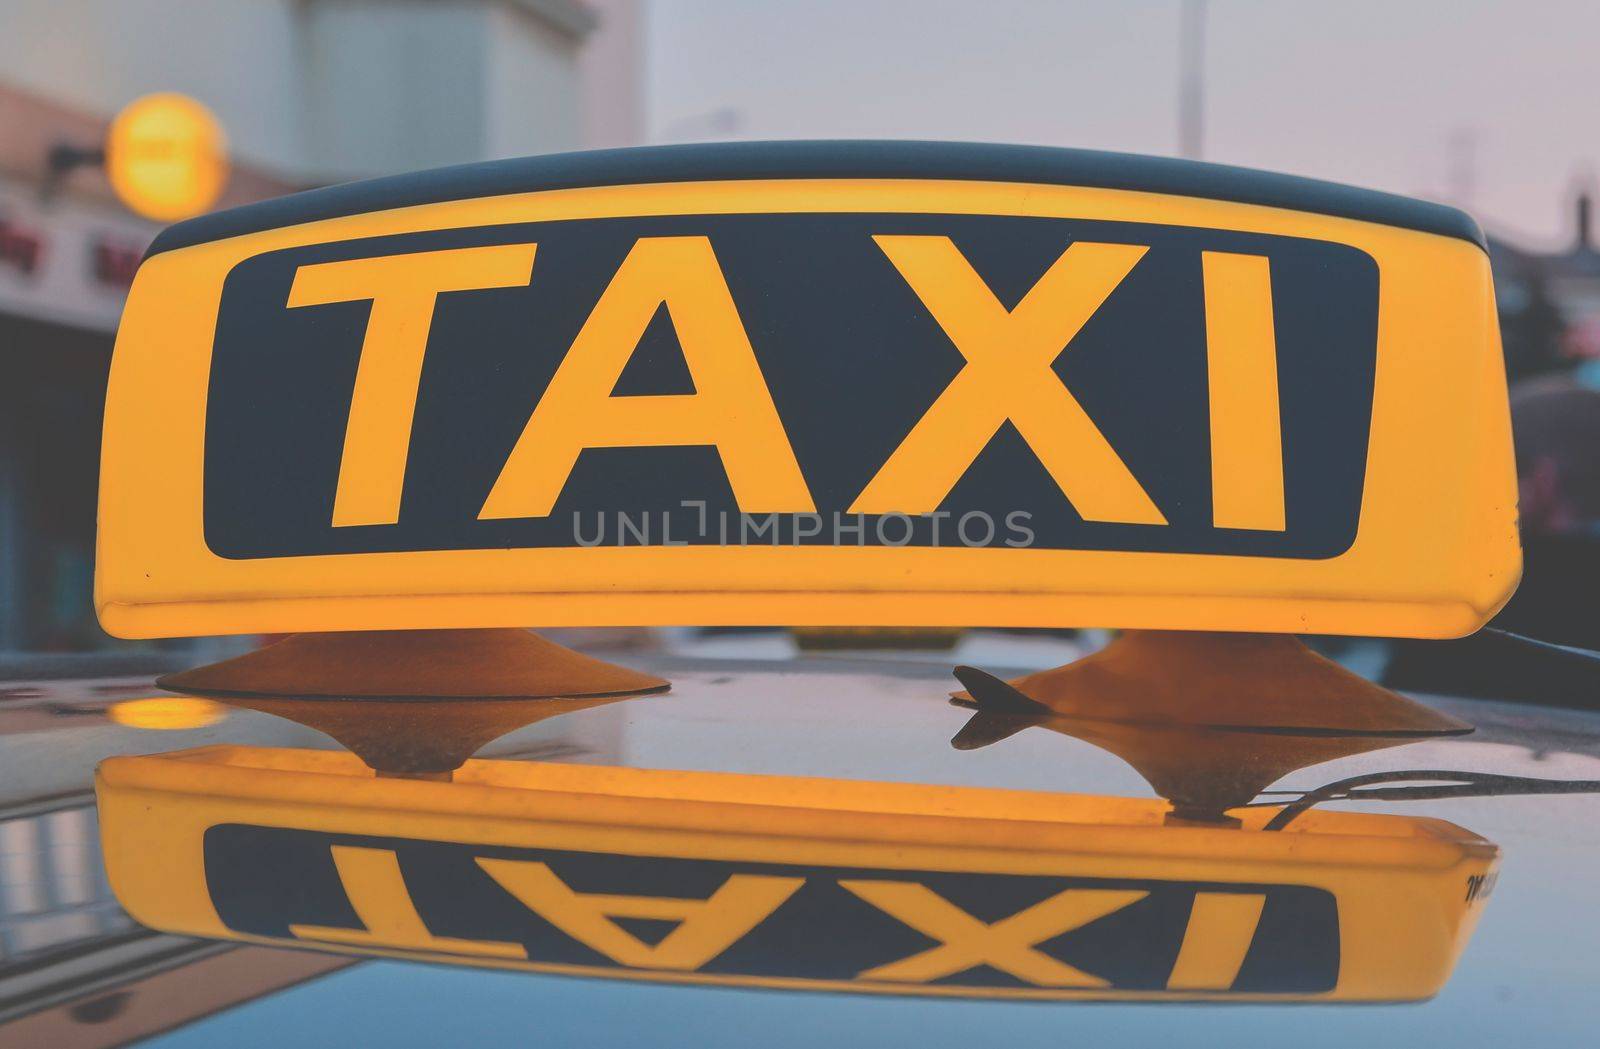 Lit taxi sign on roof of taxi car in the city.